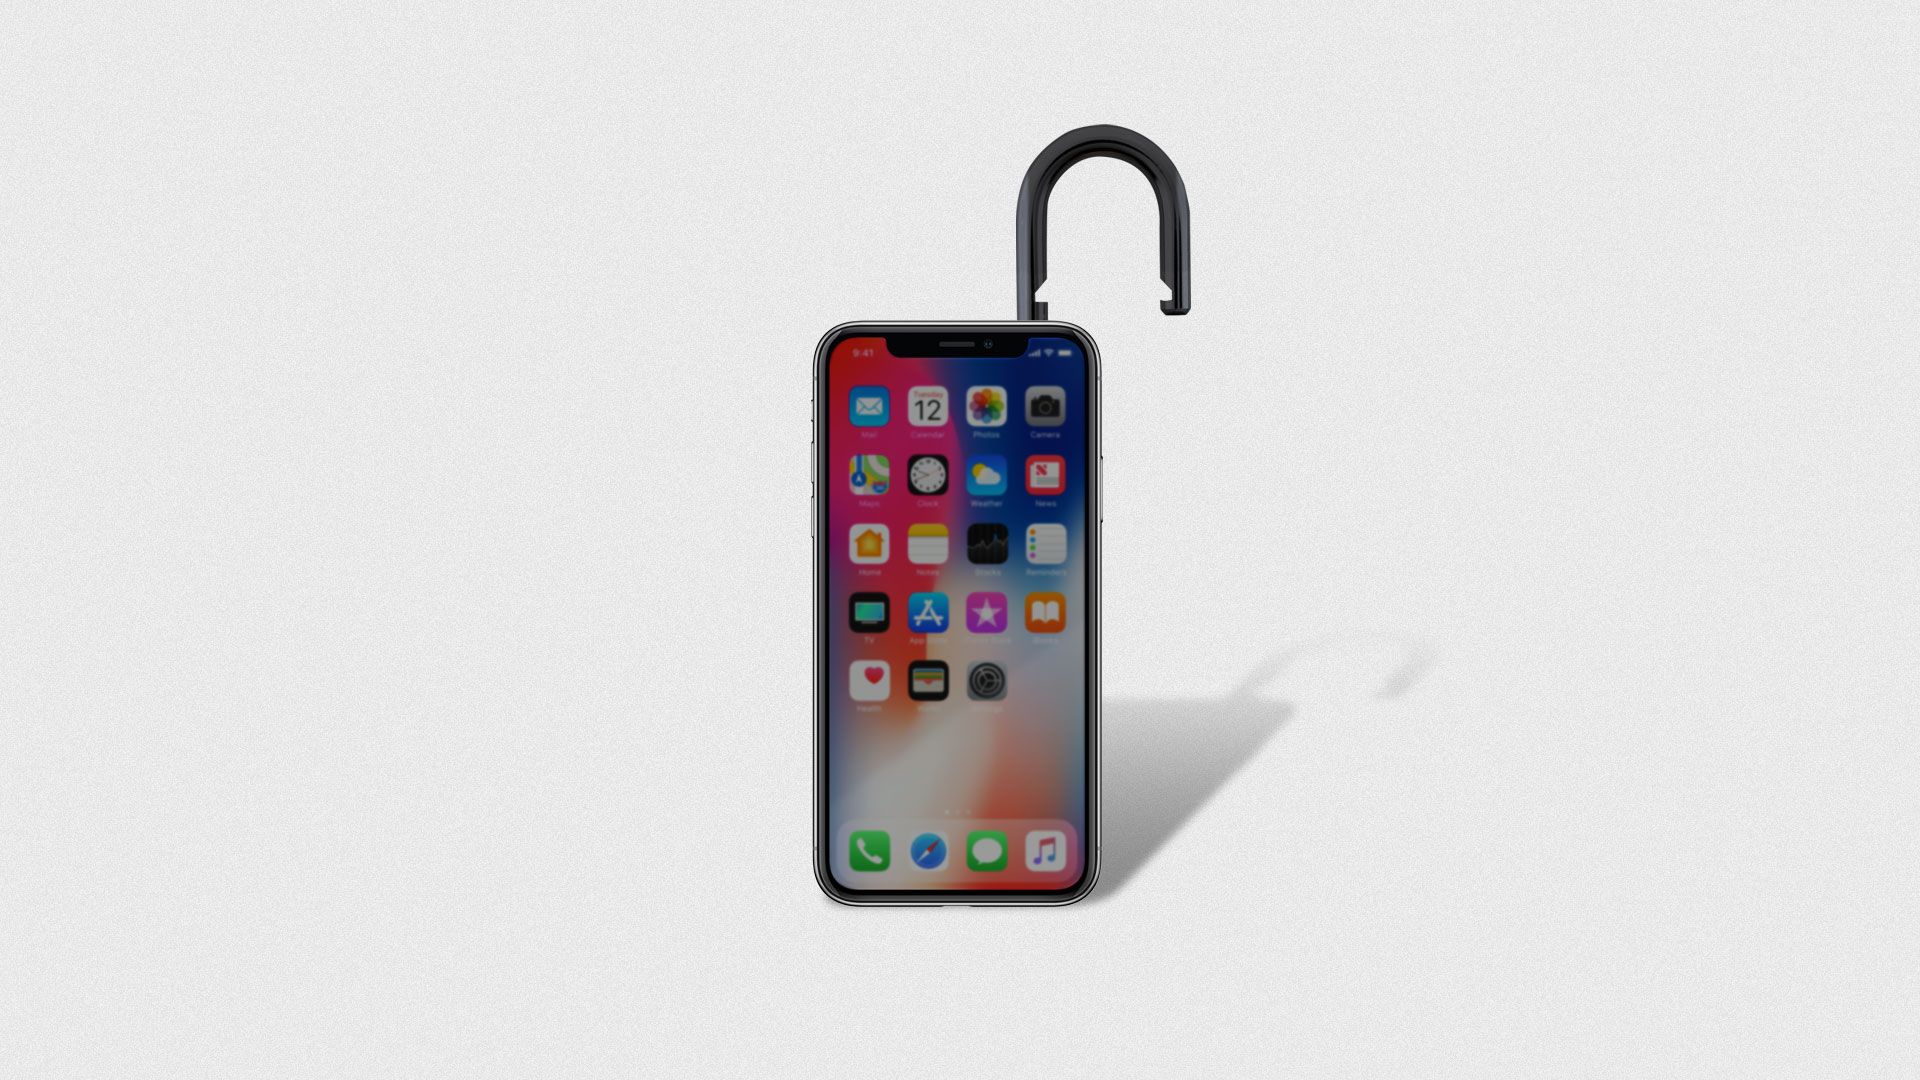  Illustration of an iPhone with an opened padlock.